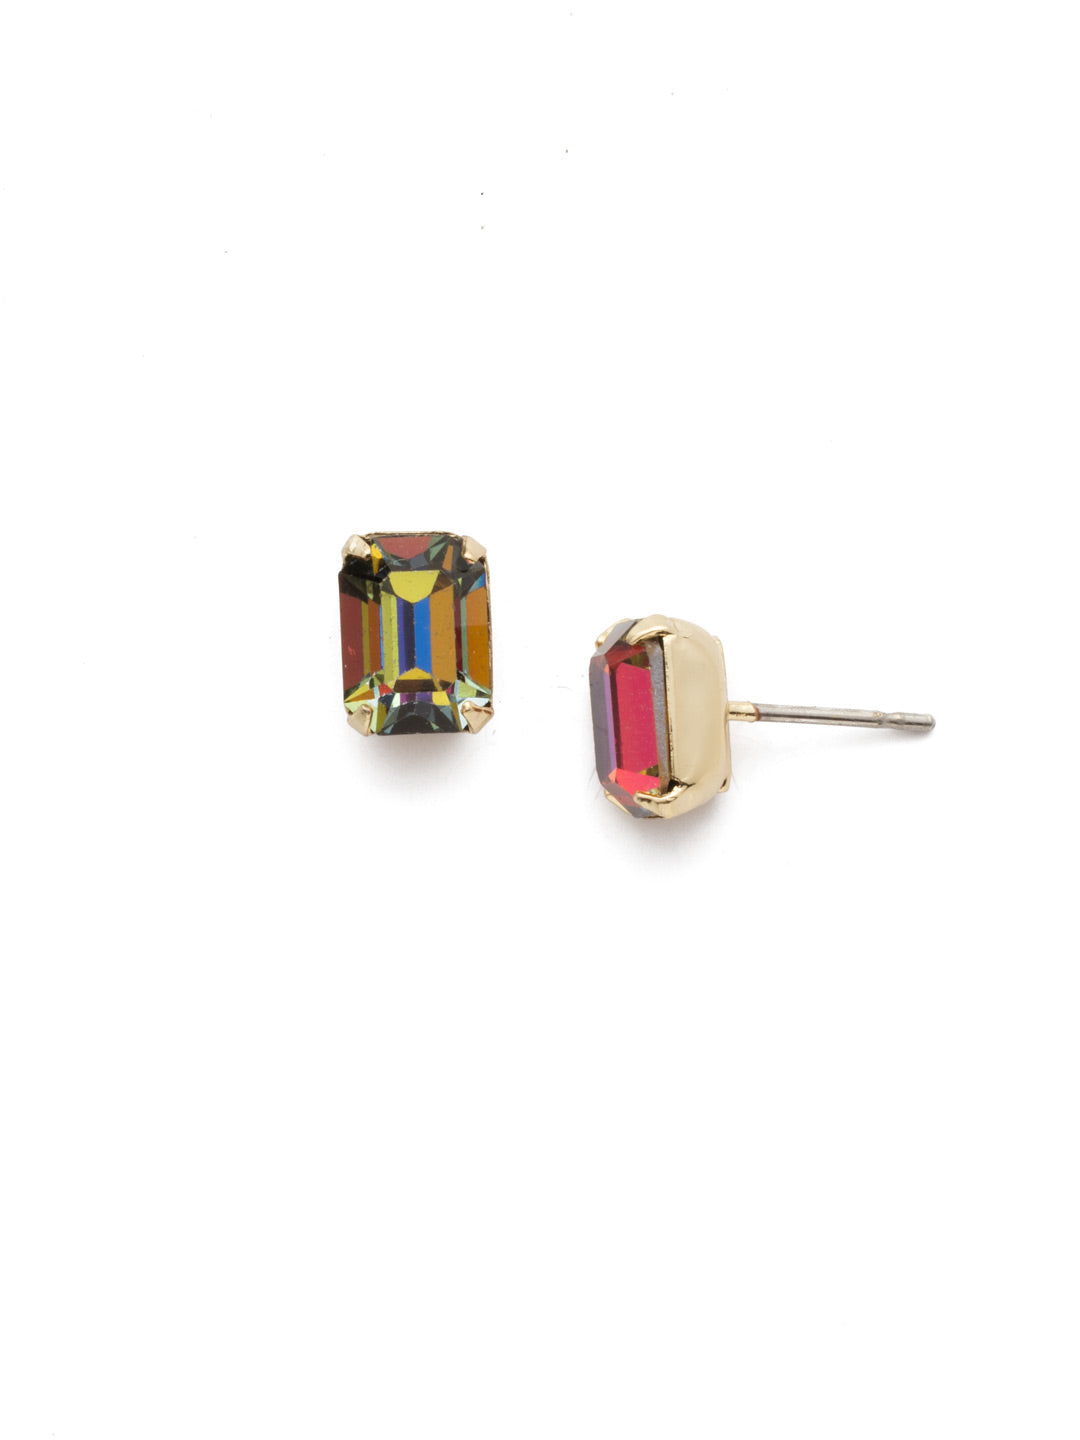 Mini Emerald Cut Stud Earrings - EBY42BGVO - Simply sophisticated. The mini emerald cut stud earrings can be worn alone or paired with anything for an extra accent to any wardrobe. From Sorrelli's Volcano collection in our Bright Gold-tone finish.